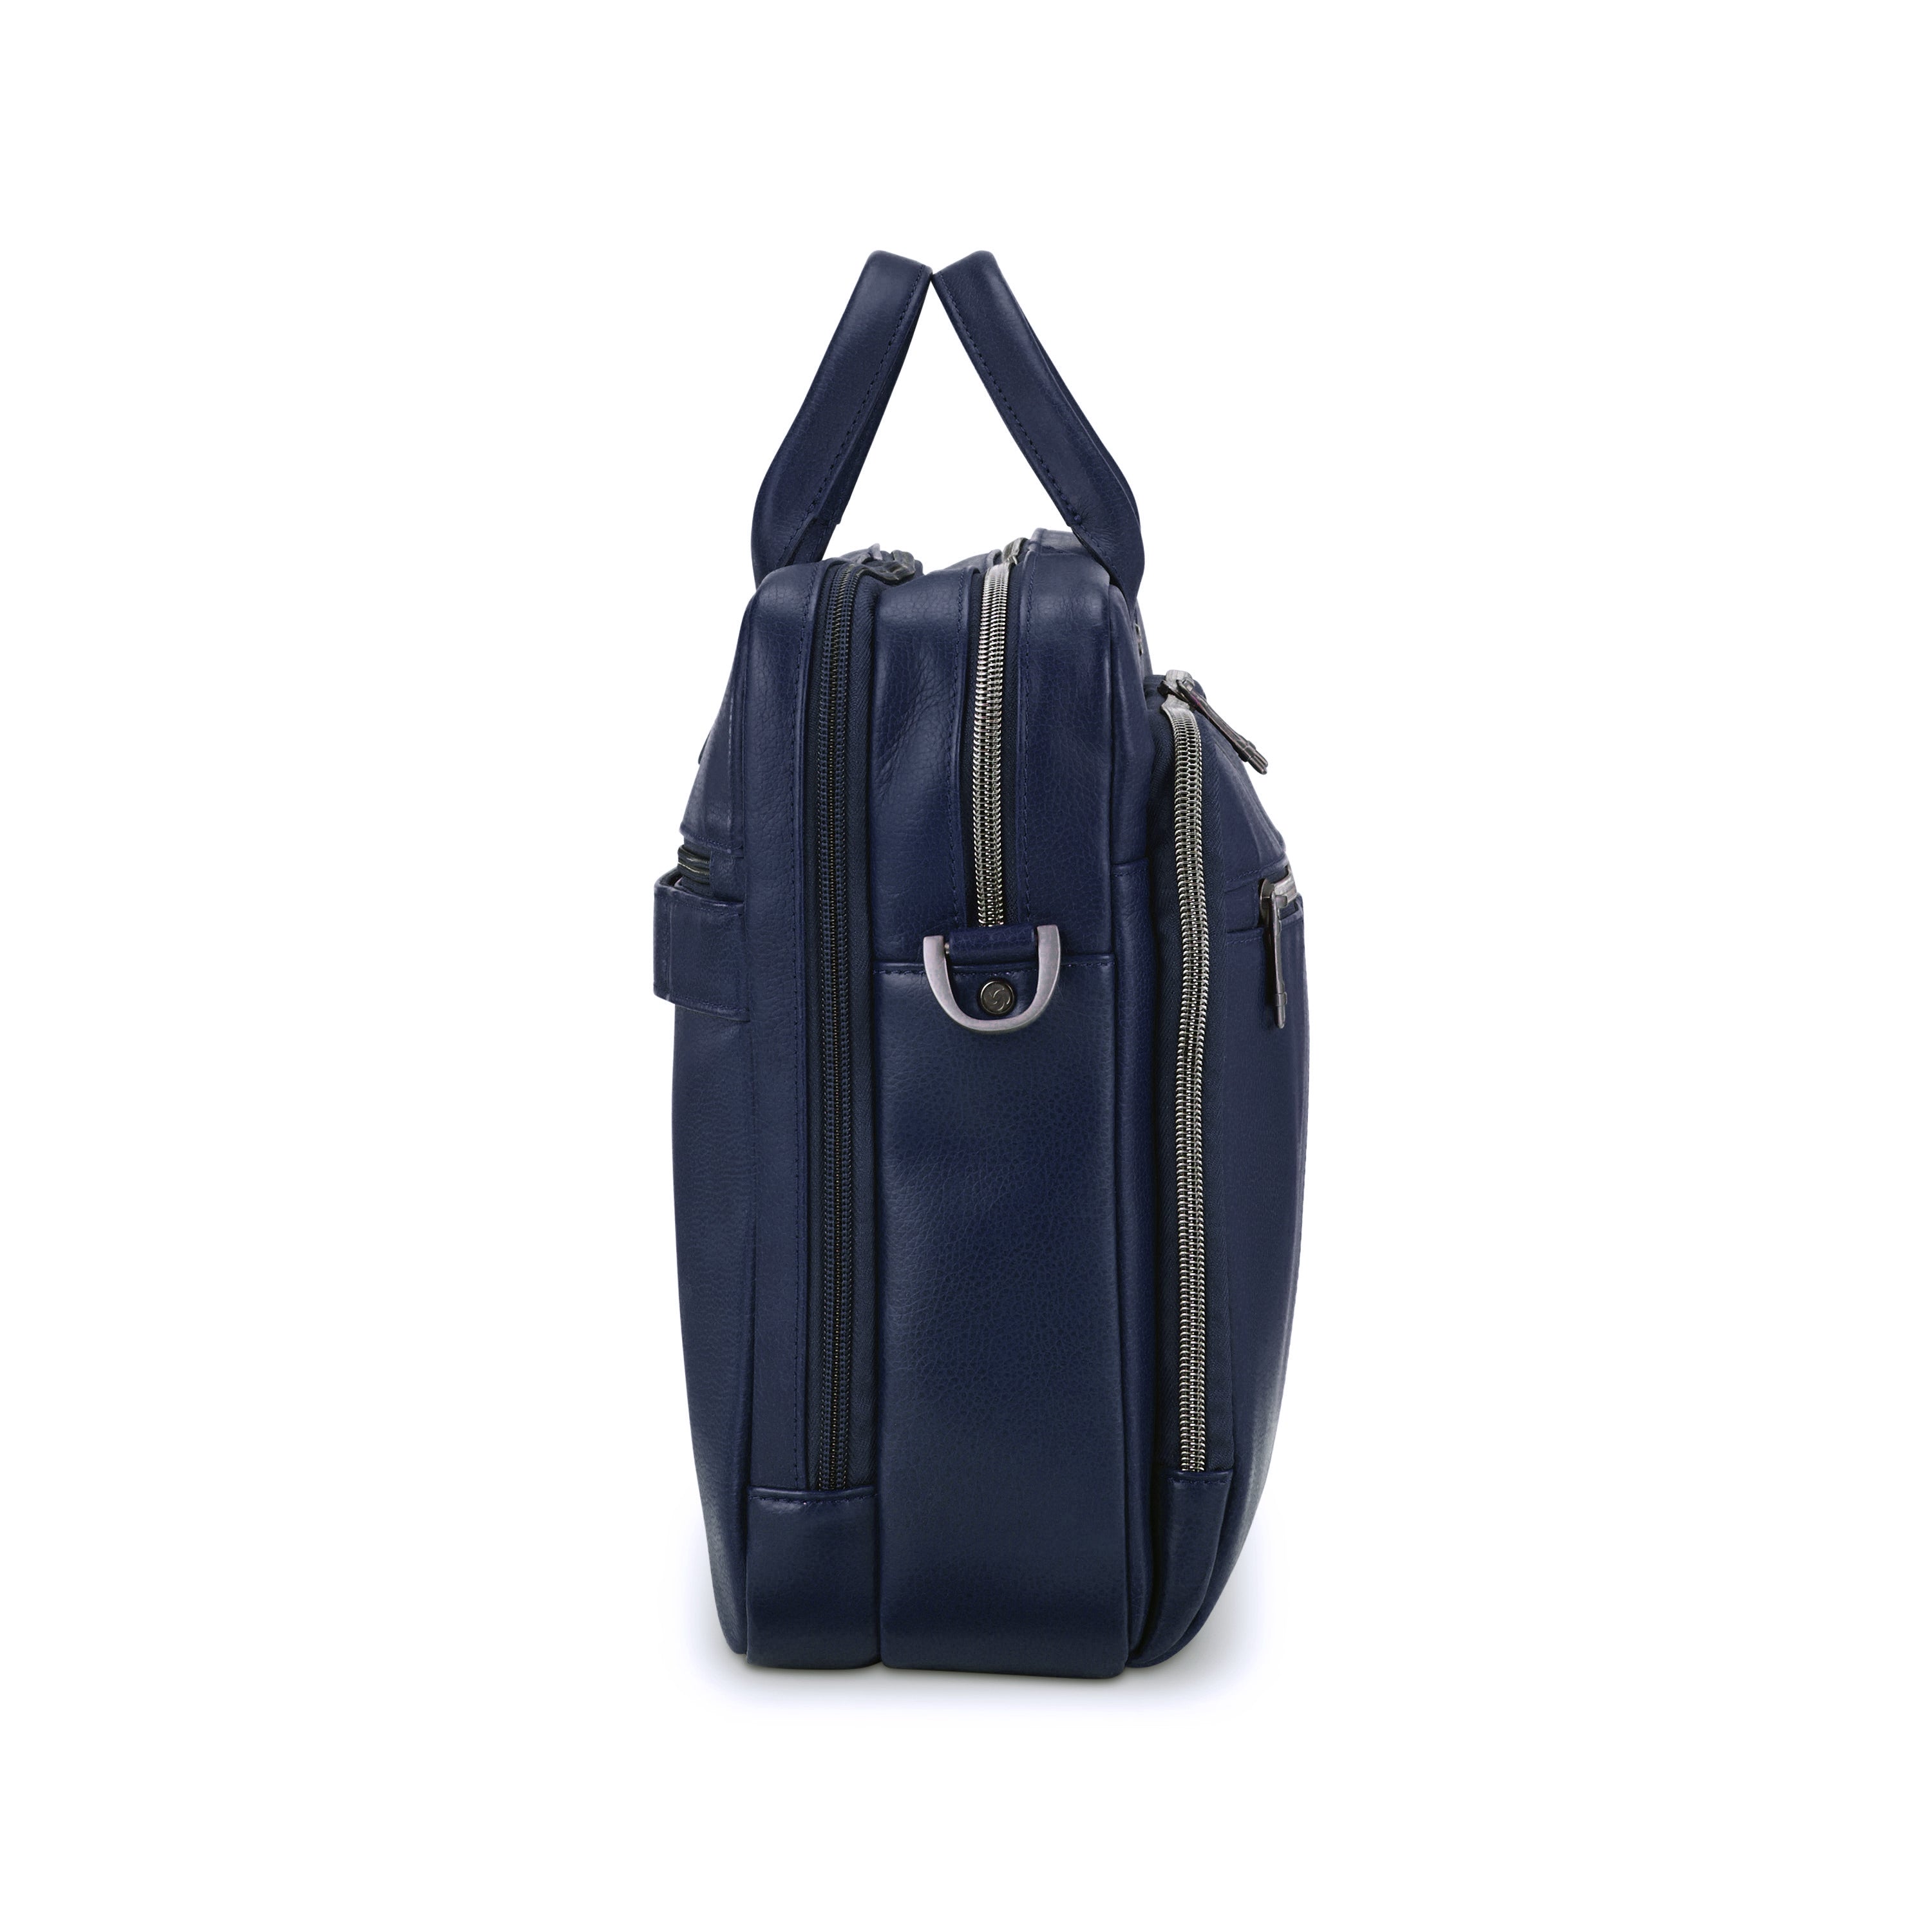 Samsonite Classic Leather 126039 Top Loader Briefcase - Navy-3